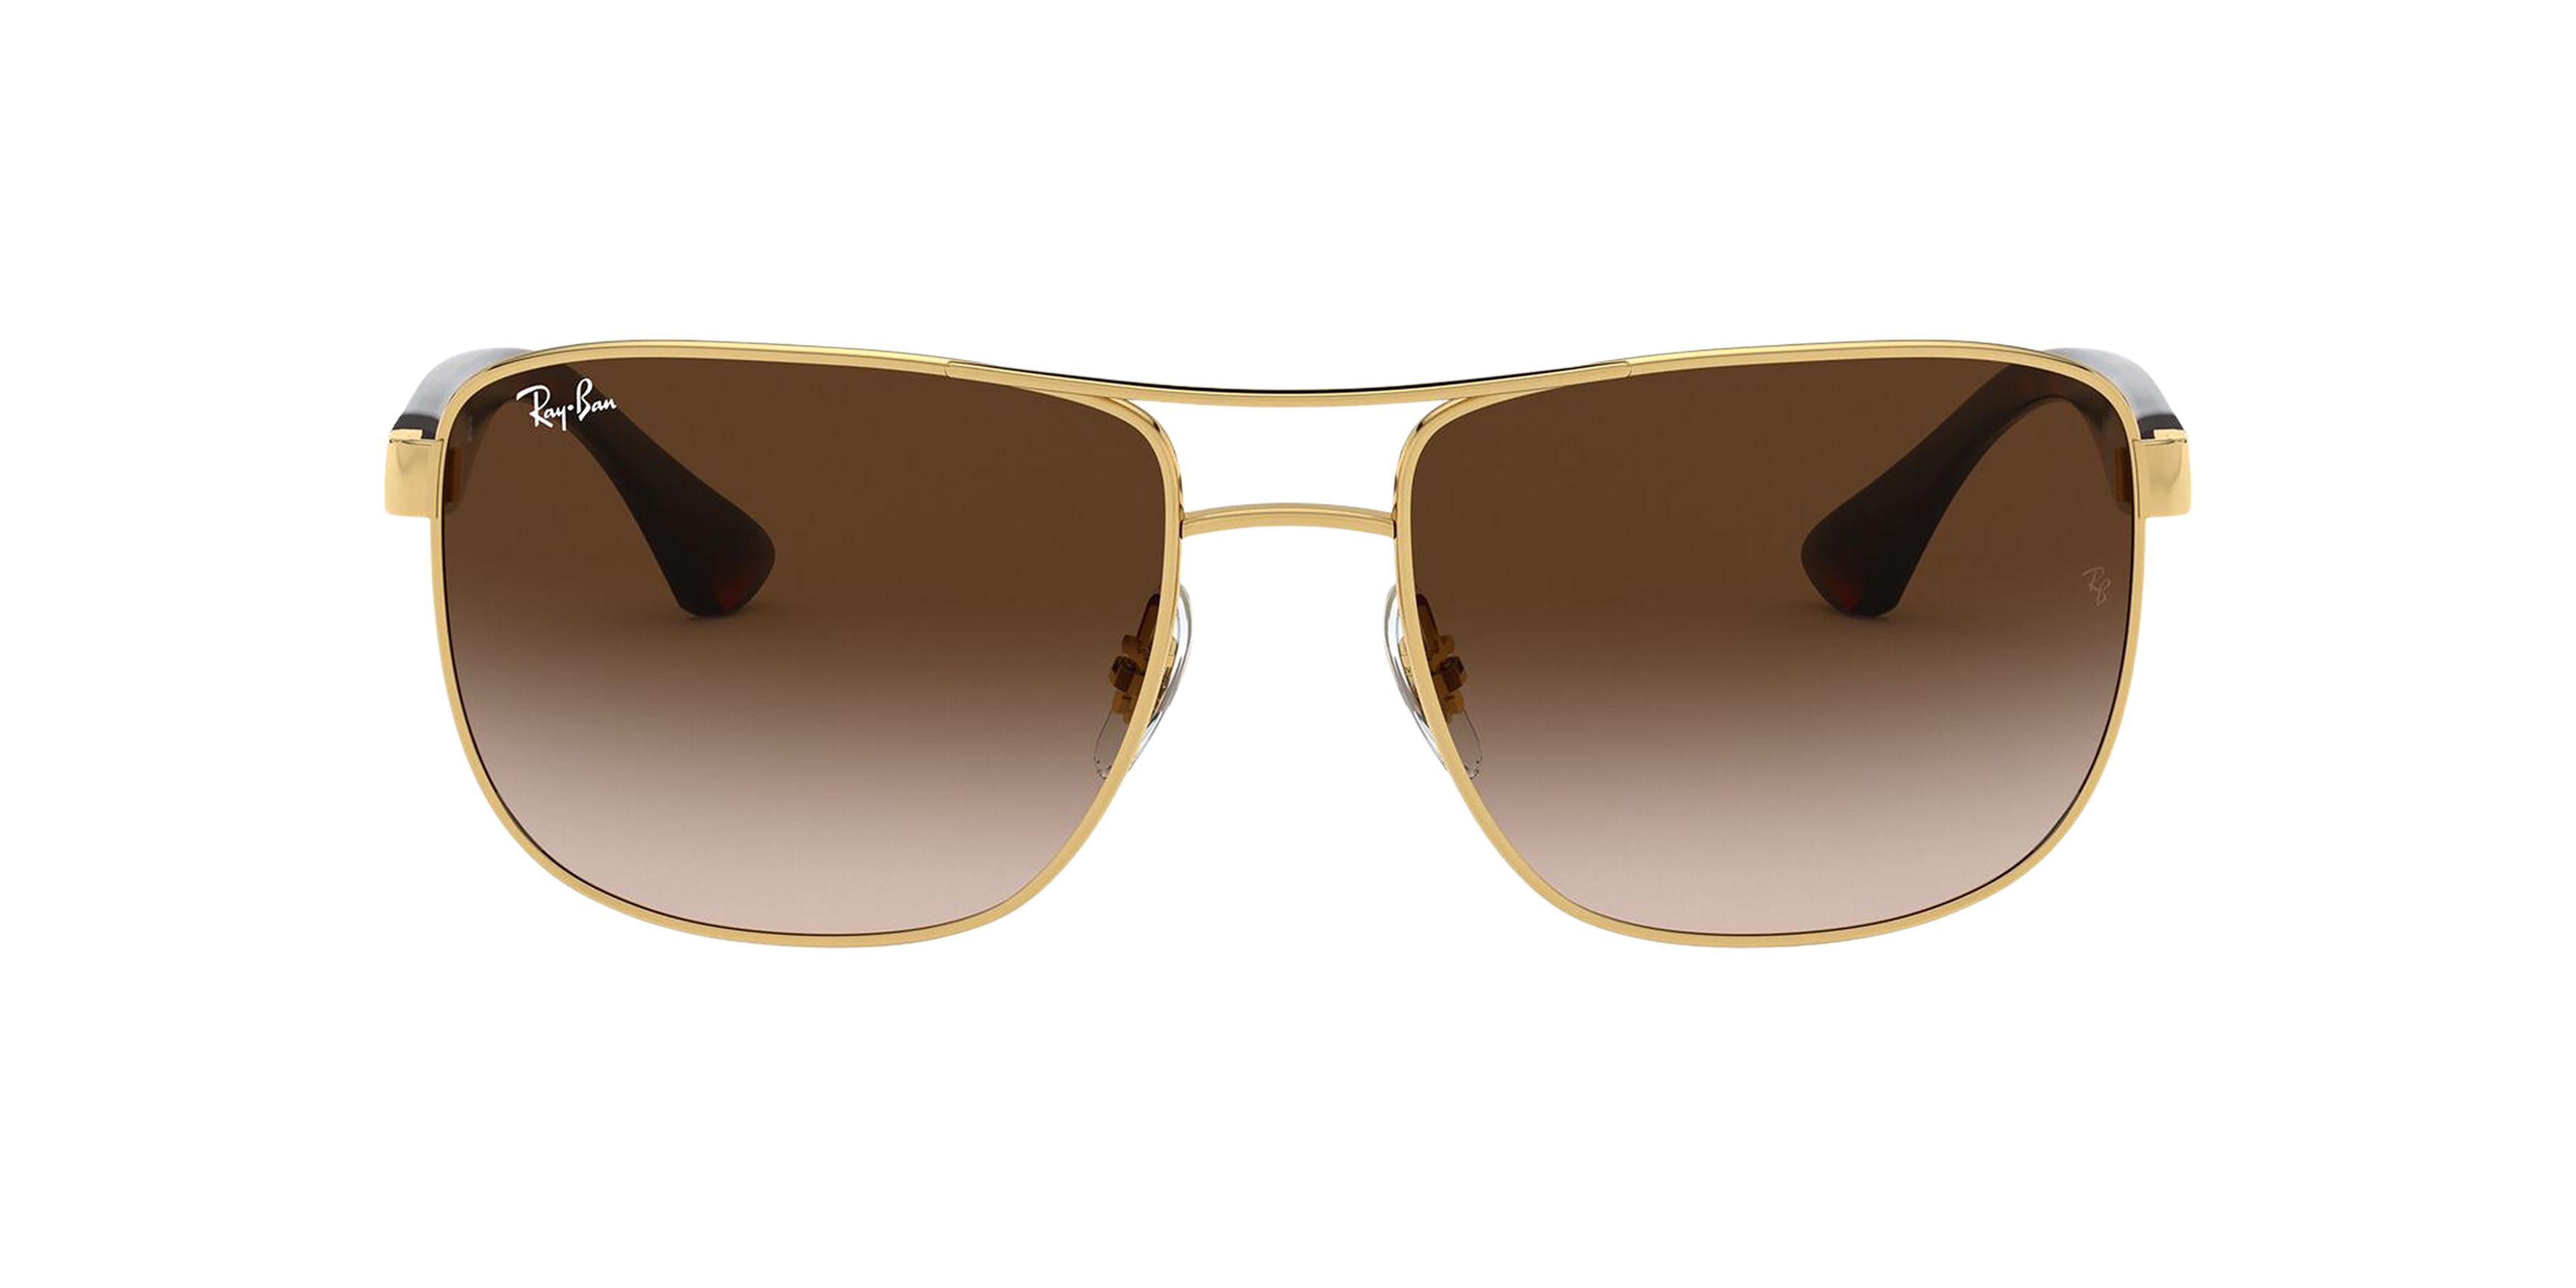 [products.image.front] Ray-Ban RB3533 001/13